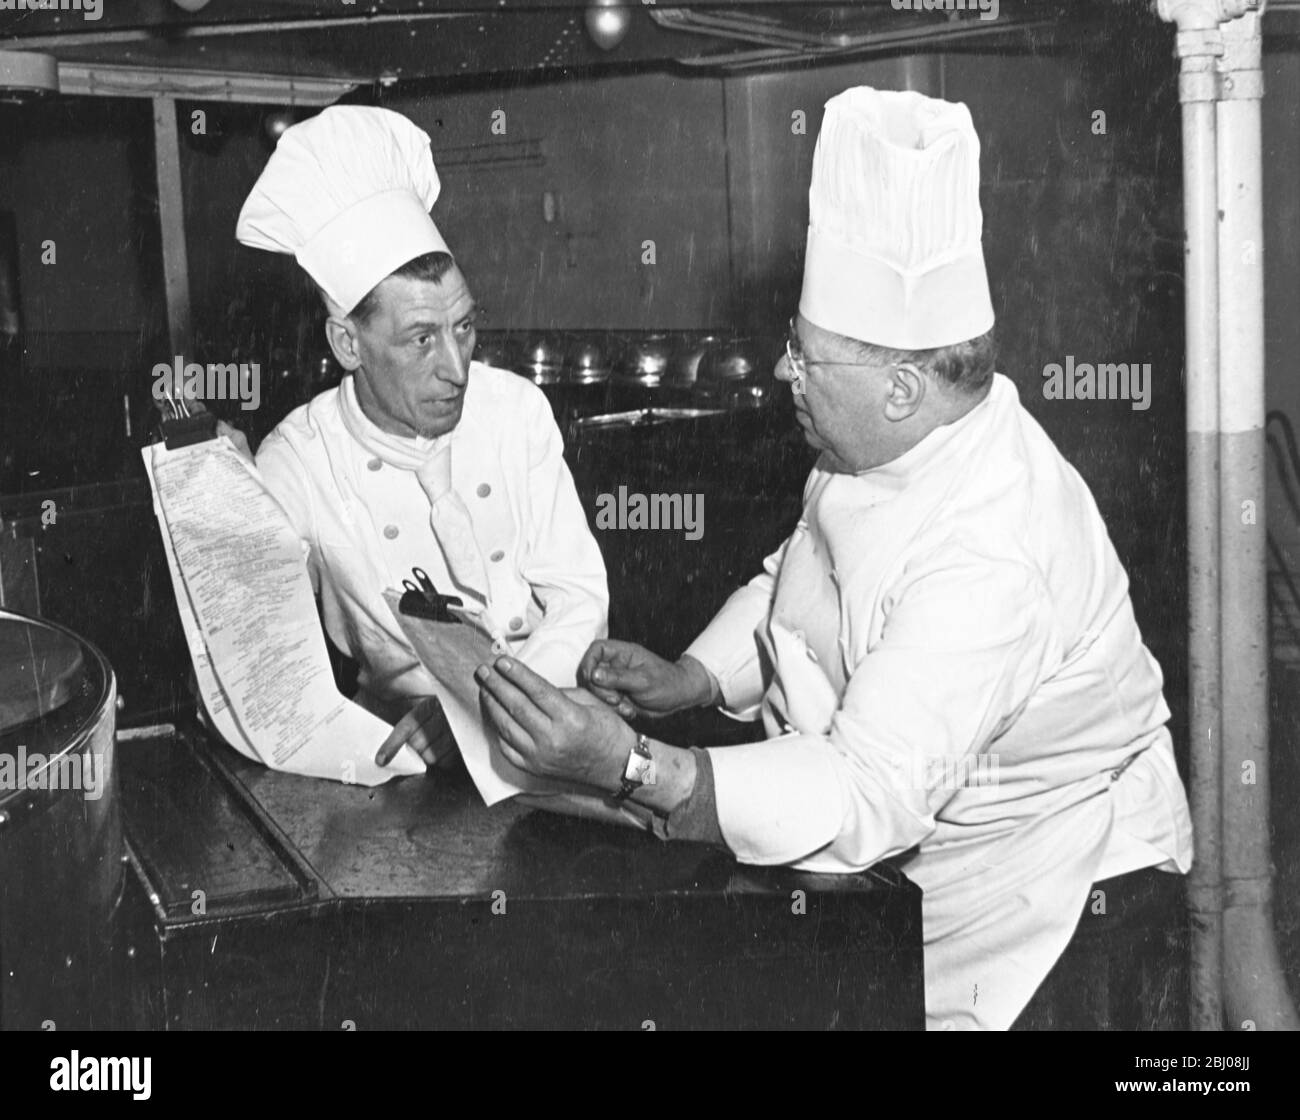 Queen Mary Chef Mr J. Pearce, assisted by second chef, Mr George Thomas (left) goes over a pre-austerity menu as new and reconditioned British liners re-establish their place in the North Atlantic. - Southampton, Hampshire, England bound for New York, USA. - 17 April 1948 Stock Photo